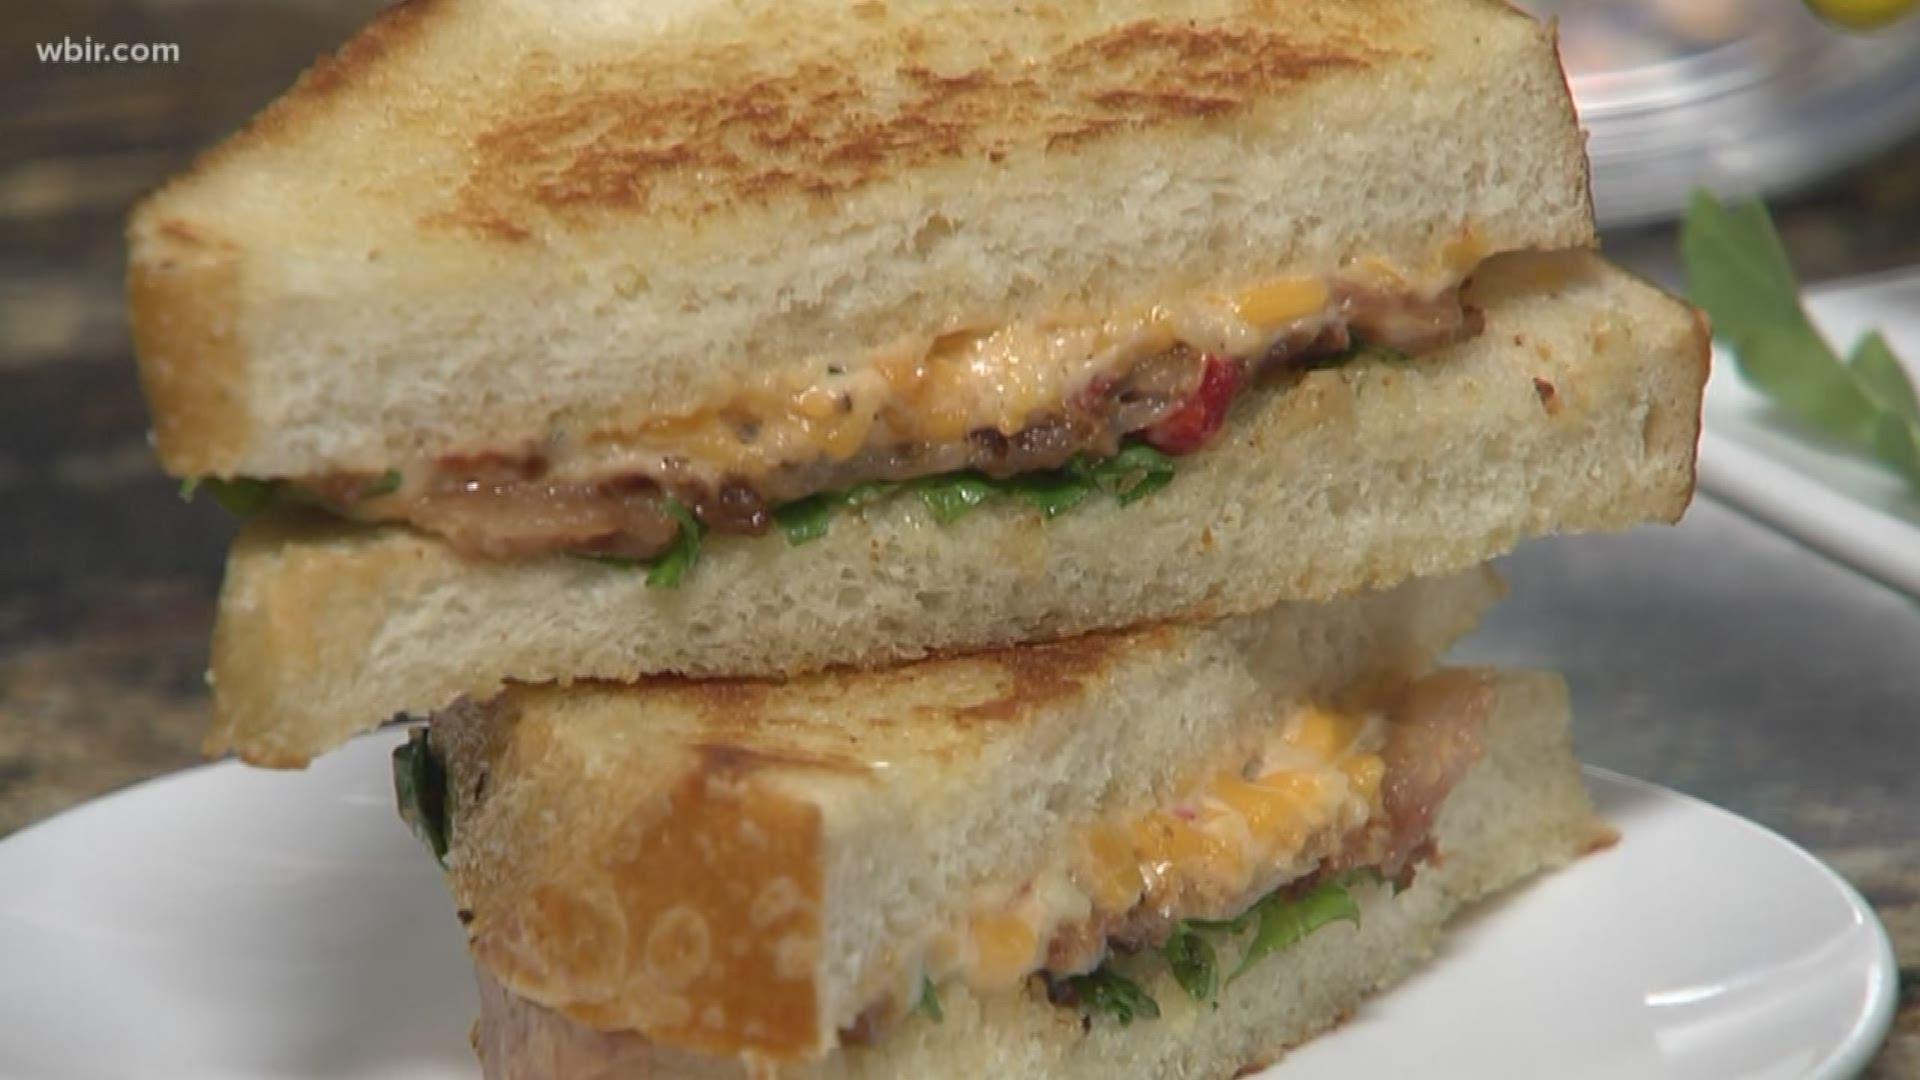 Chef John and Angie from Cooks on the Curb joined us on Monday with a delicious recipe for  bacon and pimento grilled cheese along with basil tomato soup.